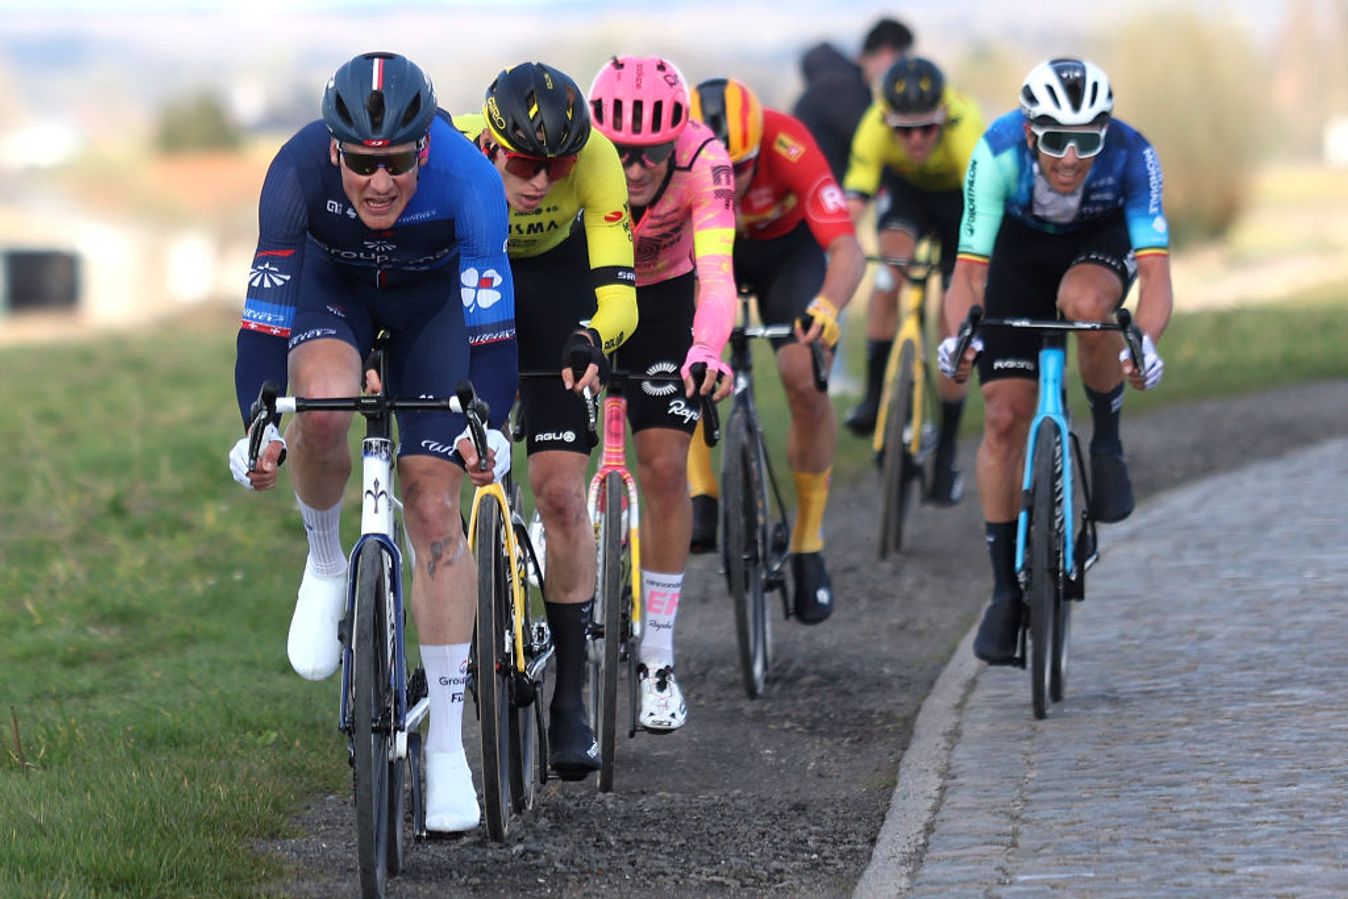 Stefan Küng (front left) could become the first Swiss rider to win the Tour of Flanders since Fabian Cancellara in 2014